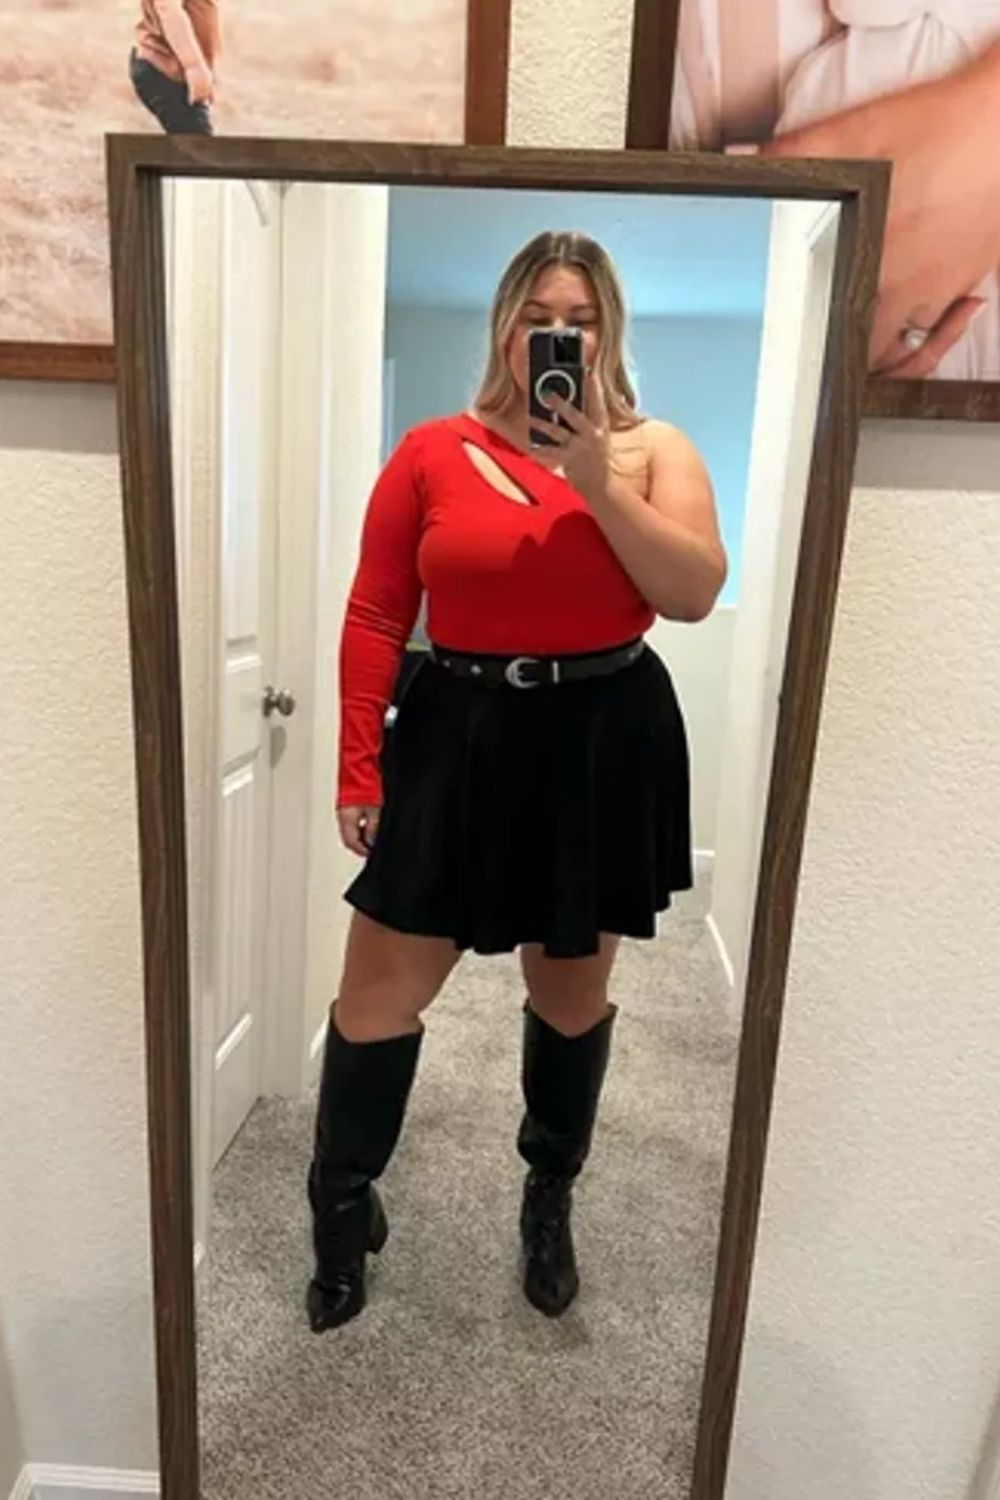 Bold red top, high-waisted black skirt, knee-high boots for a confident look.